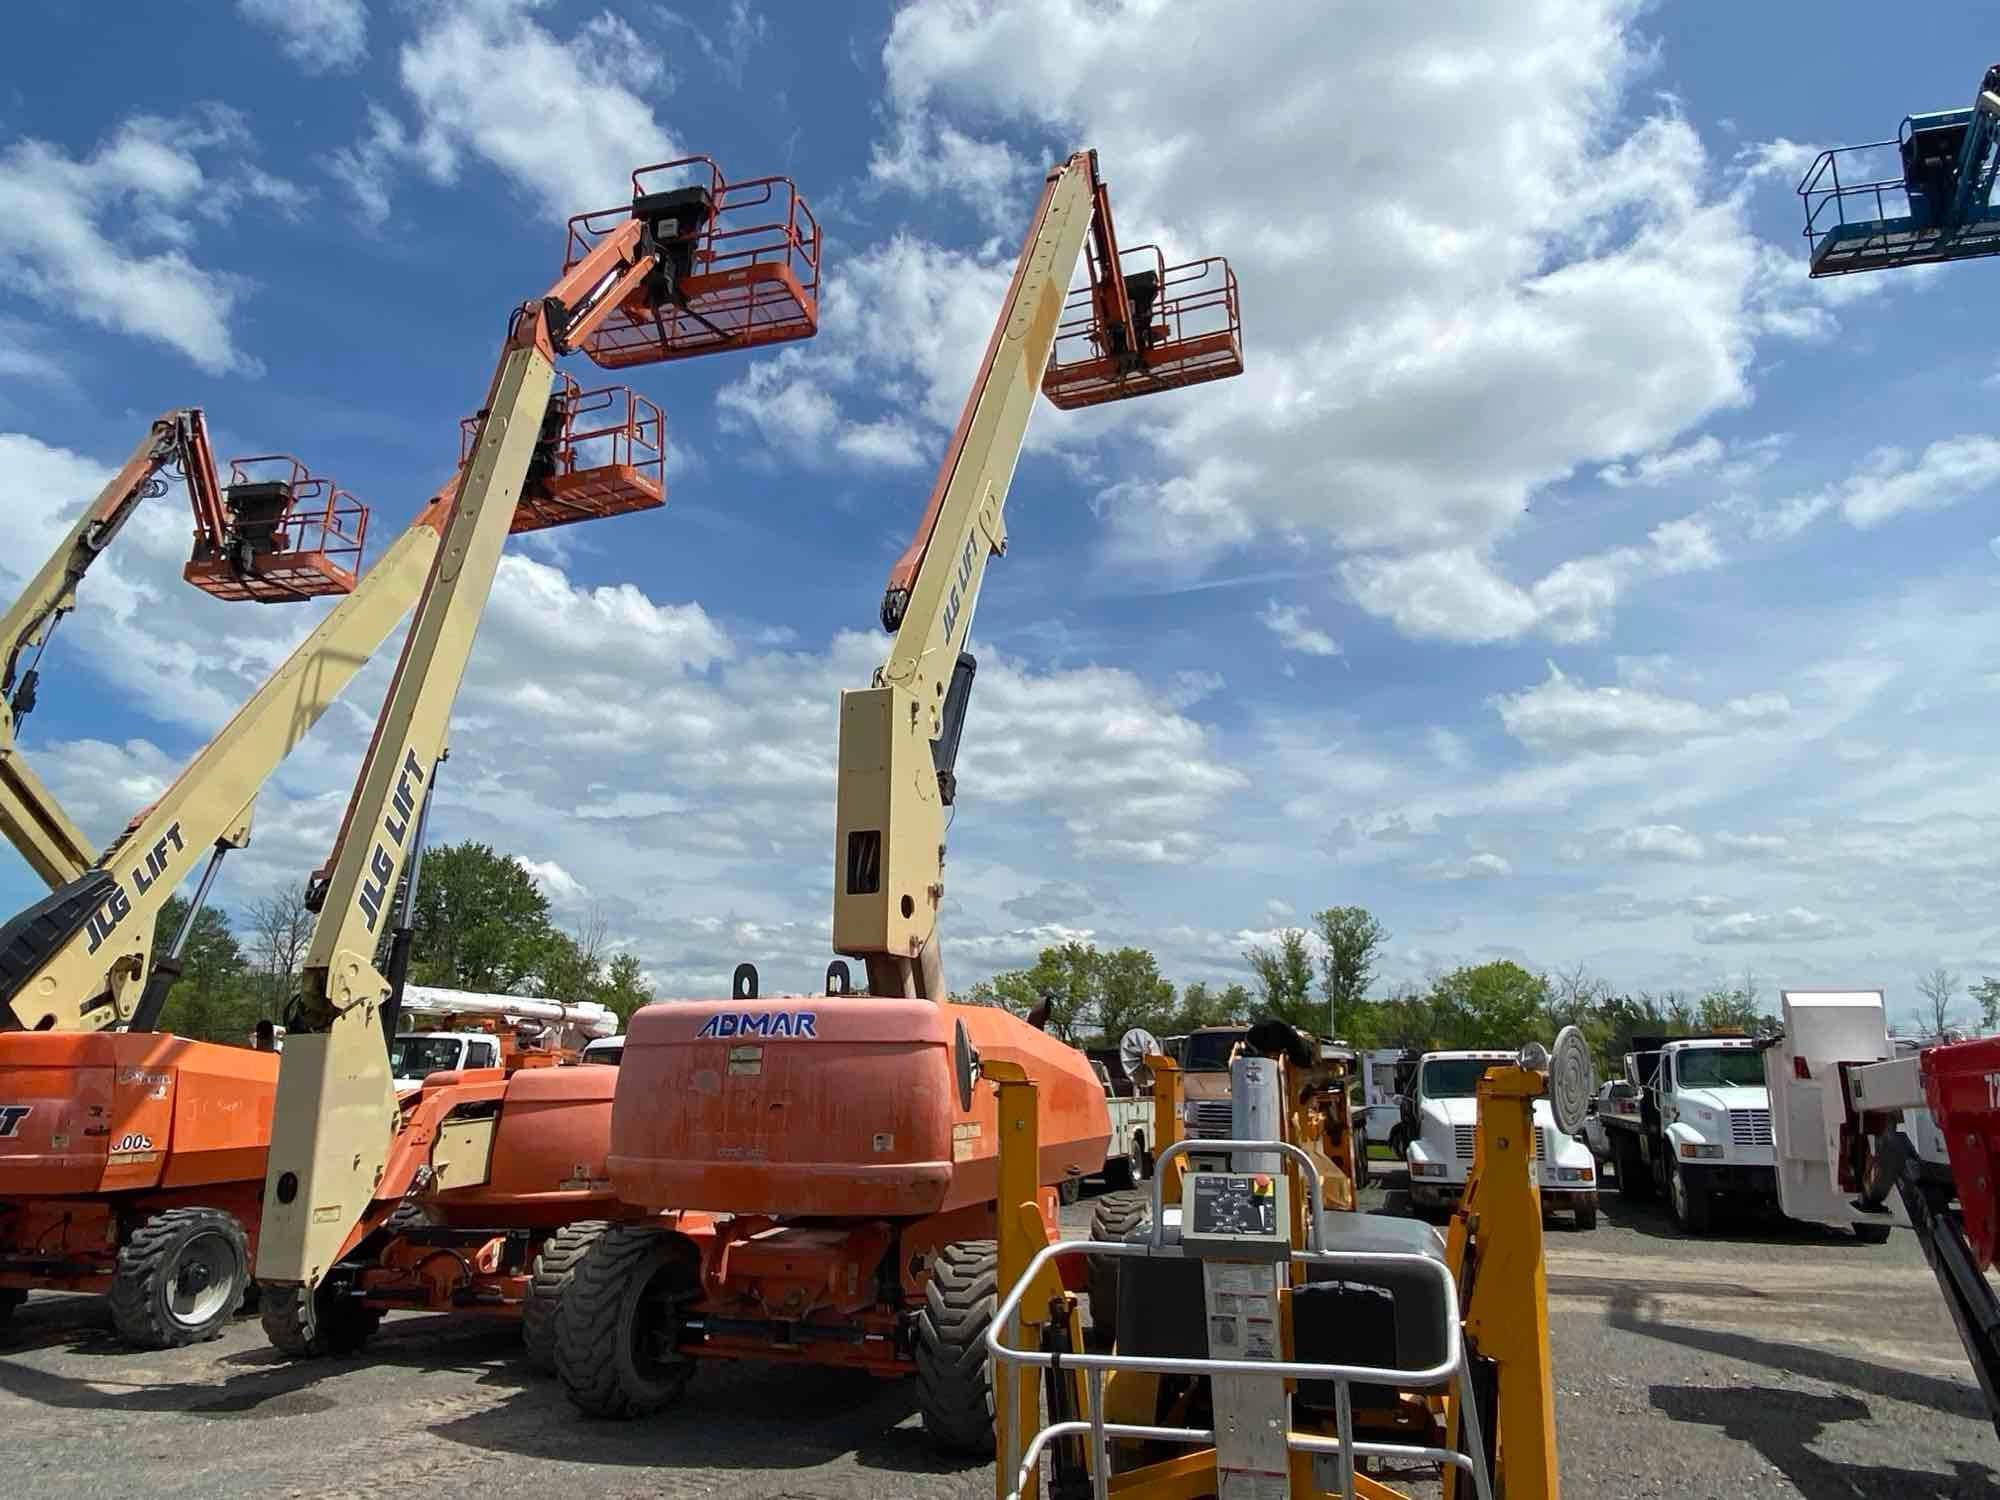 JLG 860SJ BOOM LIFT sn-5882 4x4, powered by diesel engine, equipped with 86ft. Platform height,